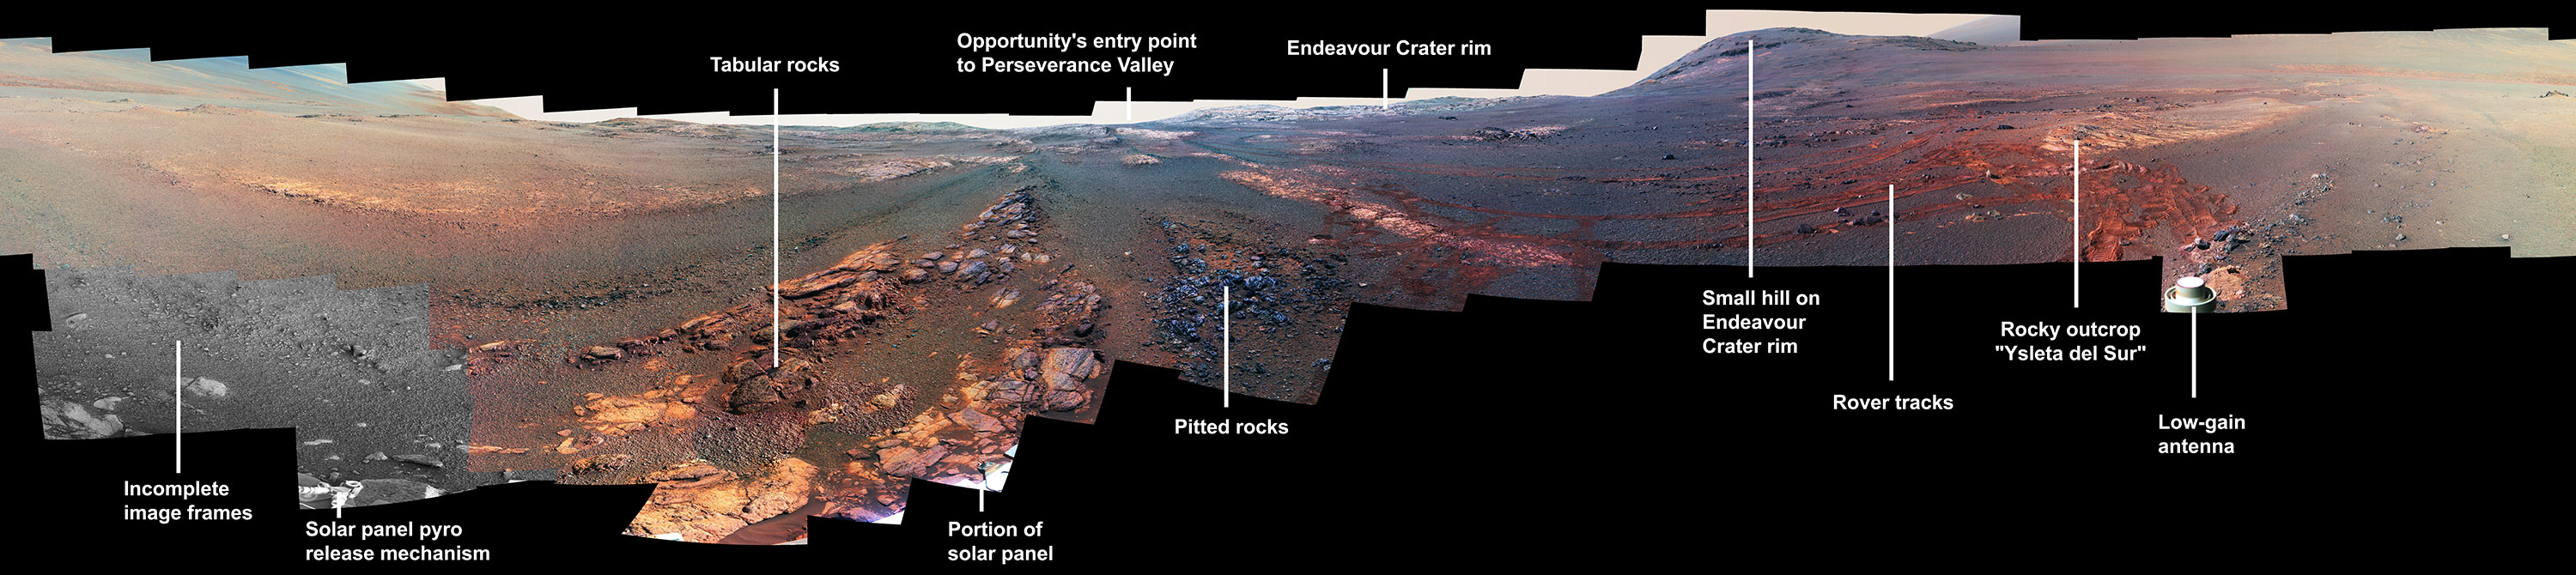 NASA publishes final Mars Opportunity rover panorama